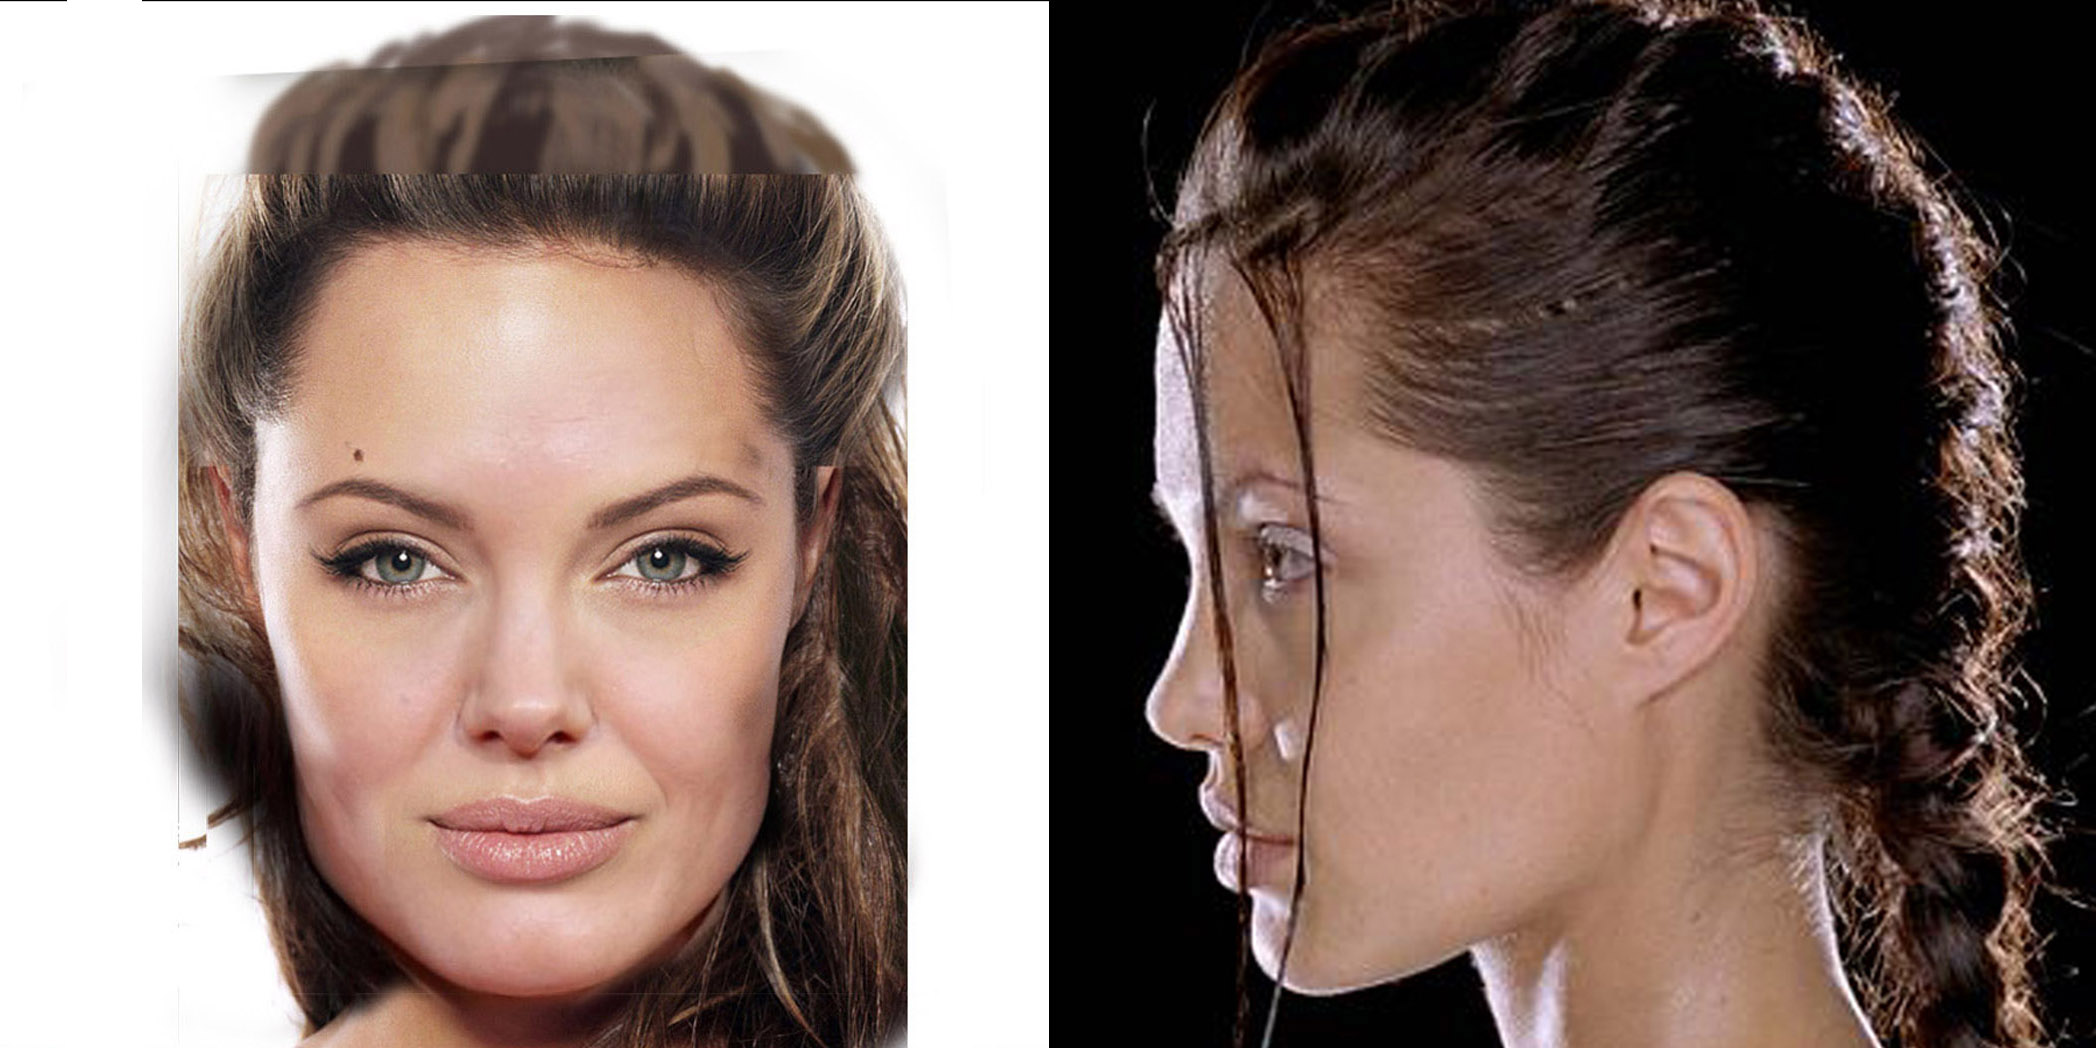 anthony ridley share angelina jolie side view photos